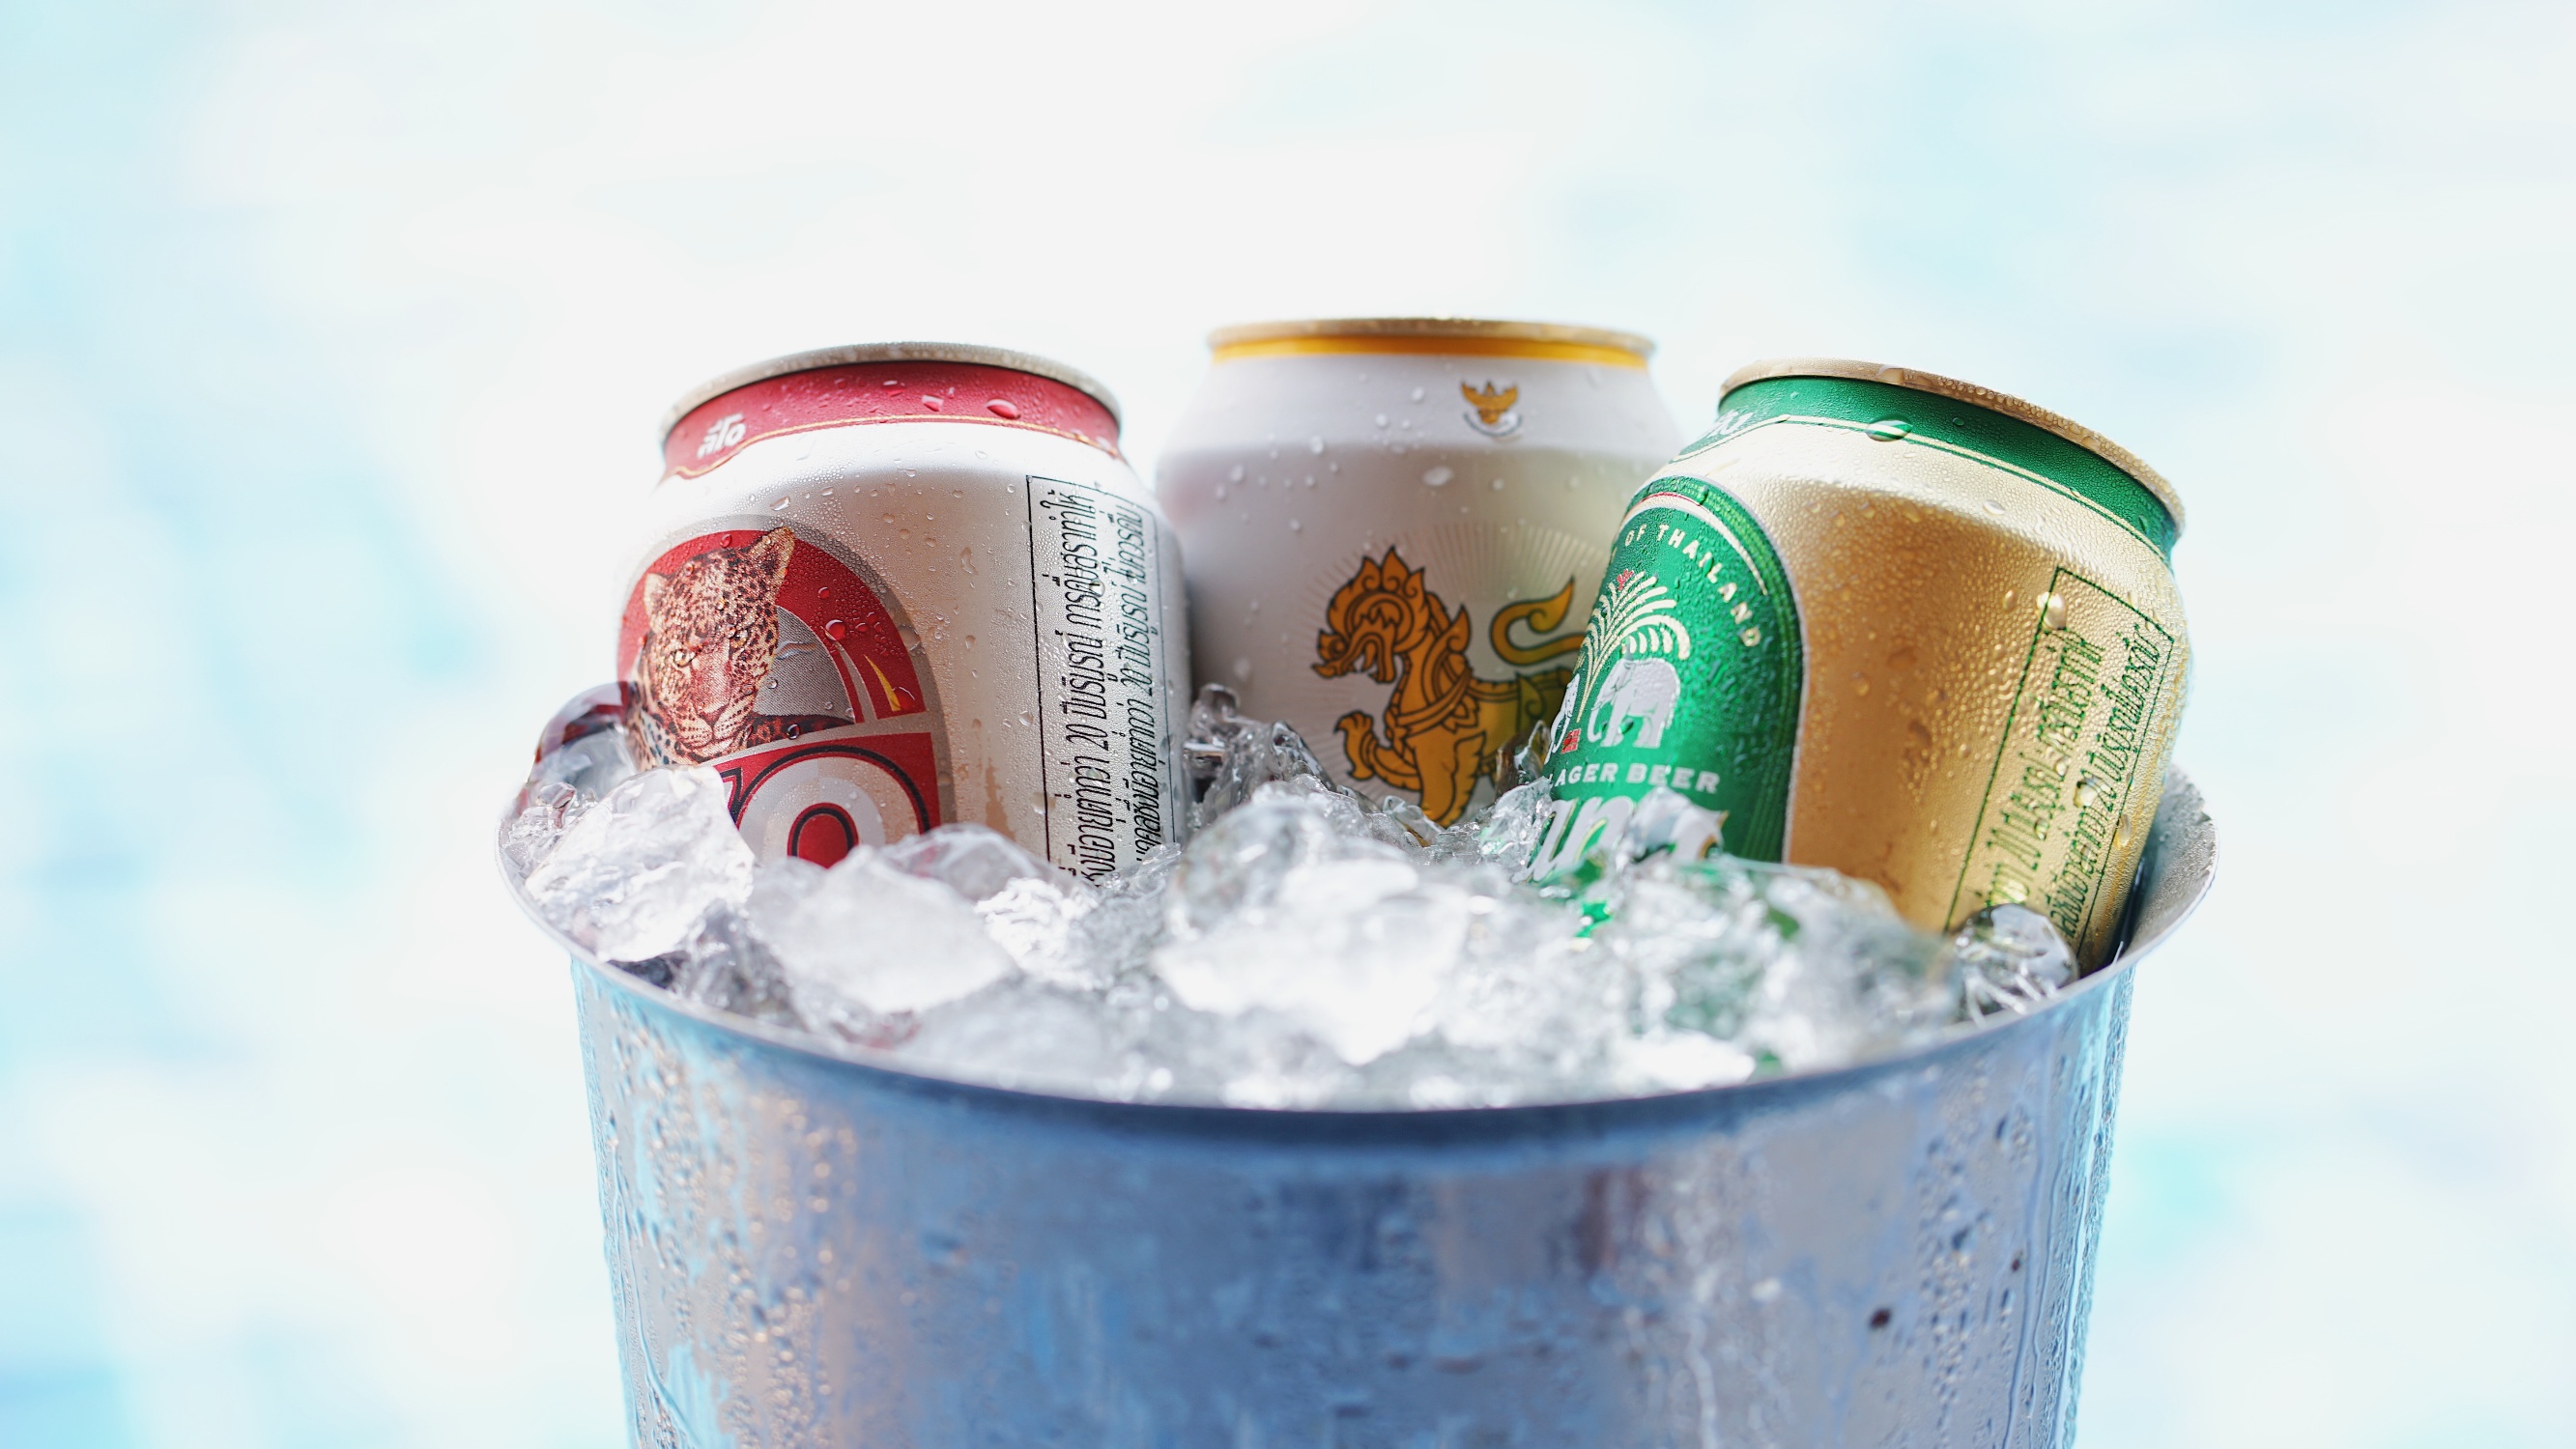 four cans of beer in a bucket of ice